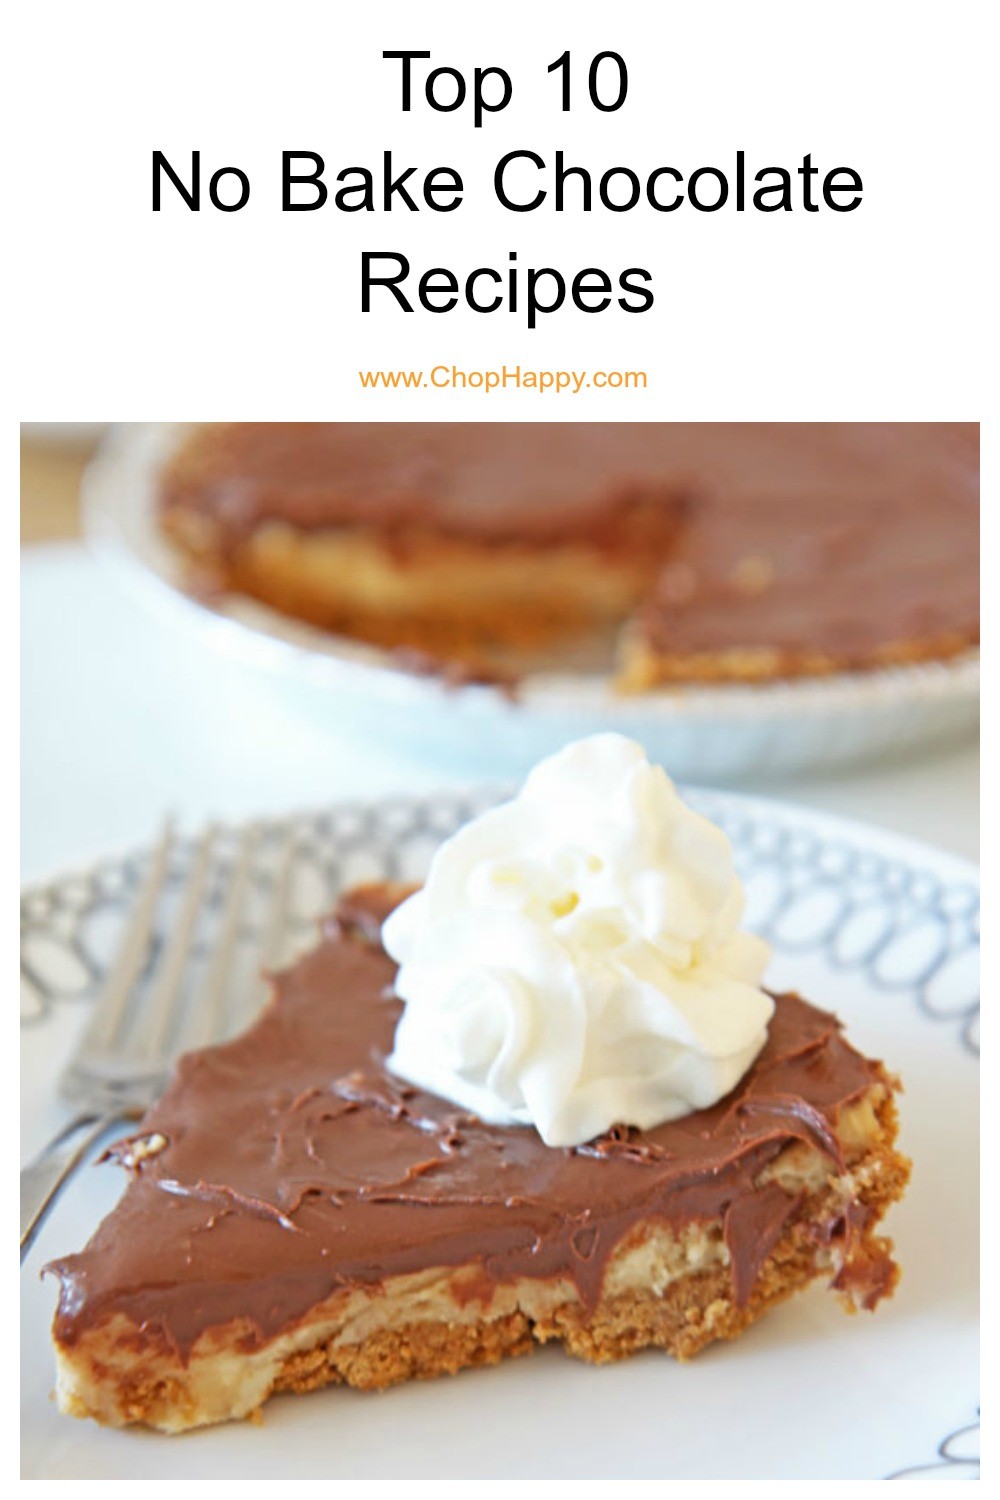 Top 10 No Bake Chocolate Recipes. Pies, no bake cakes, pies, and cheesecakes that are easy. www.ChopHappy.com #chocolaterecipes #nobakedesserts